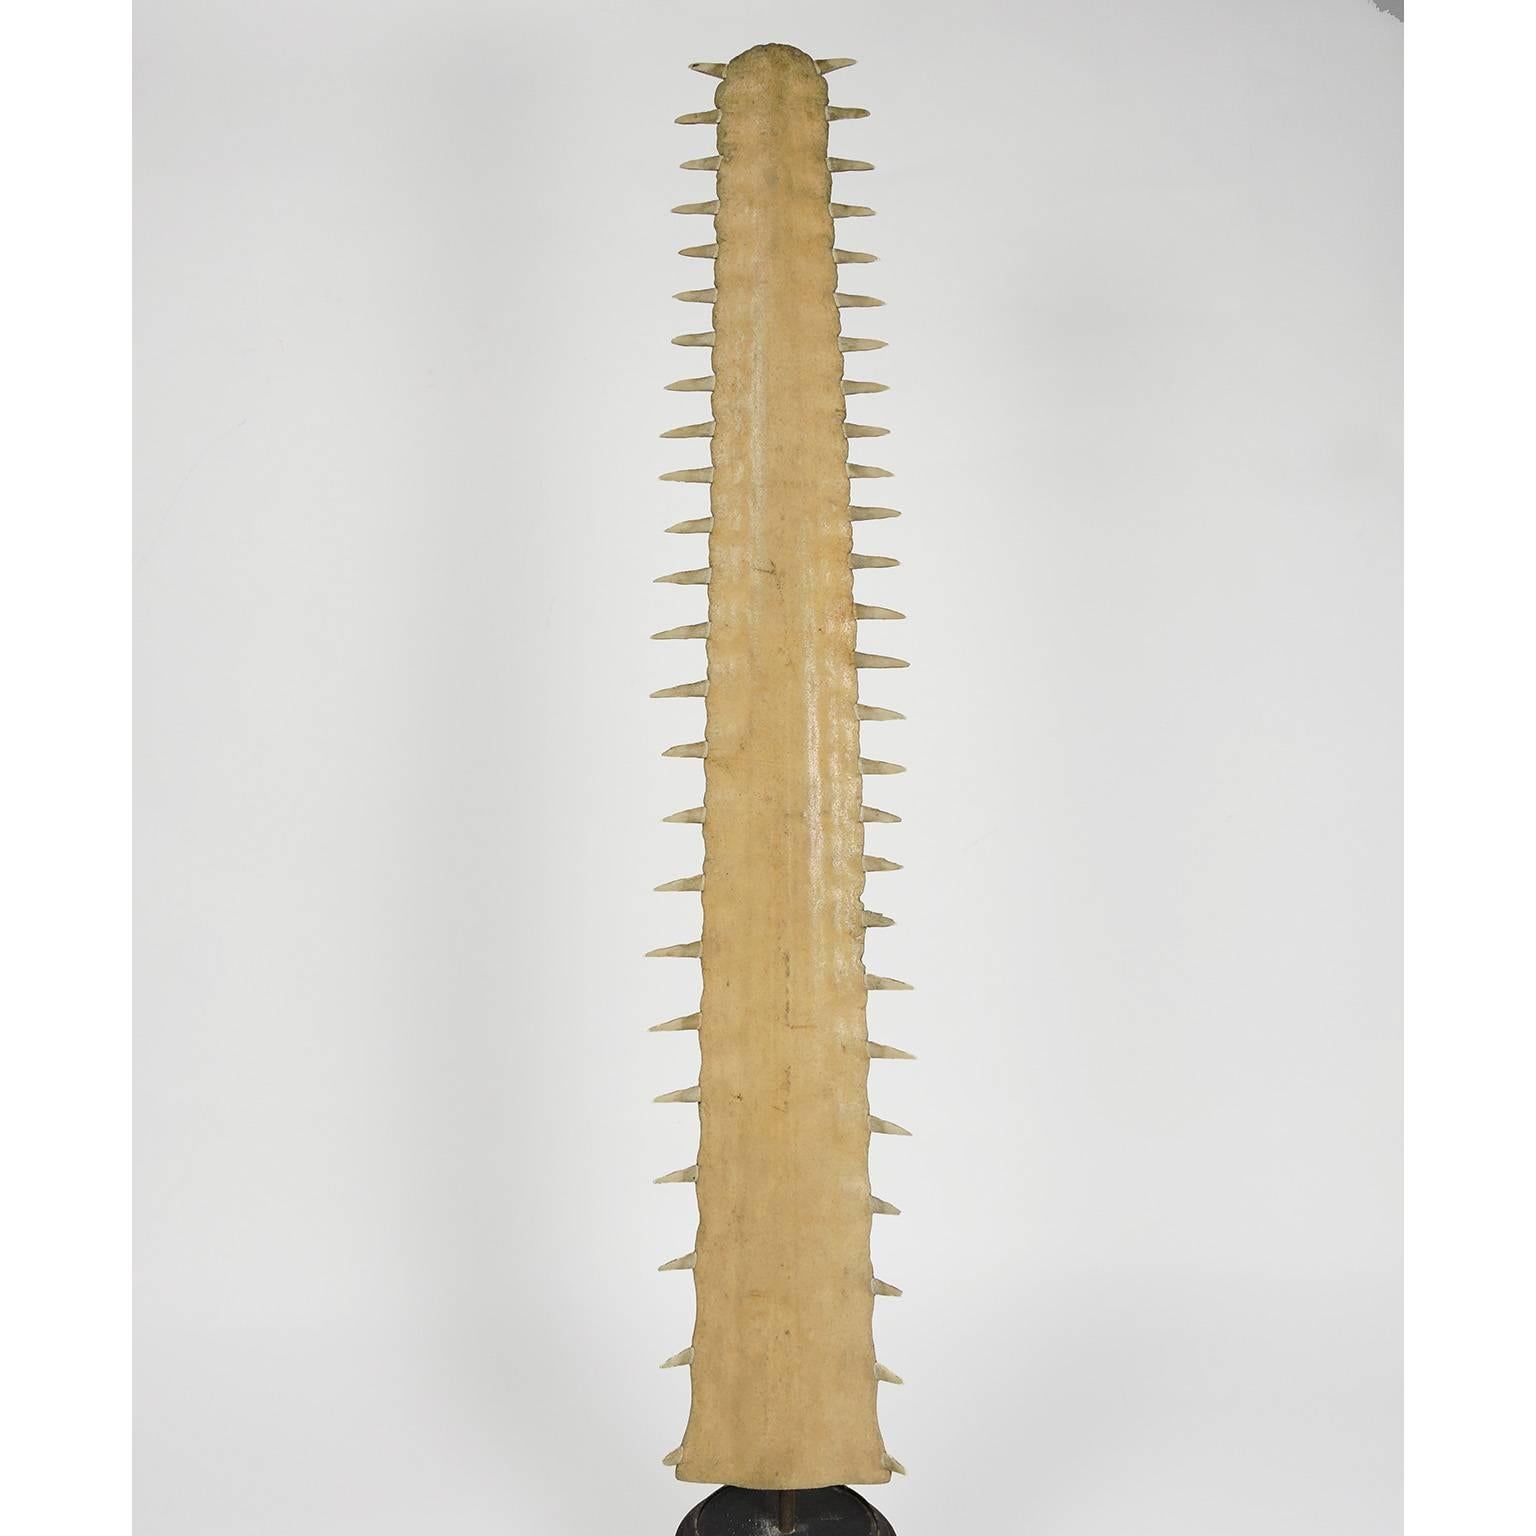 Antique mounted sawfish rostrum.
Measures: Height 31 3/8 inches, width 5 1/2 inches, with pedestal 36 inches, diameter 6 inches.